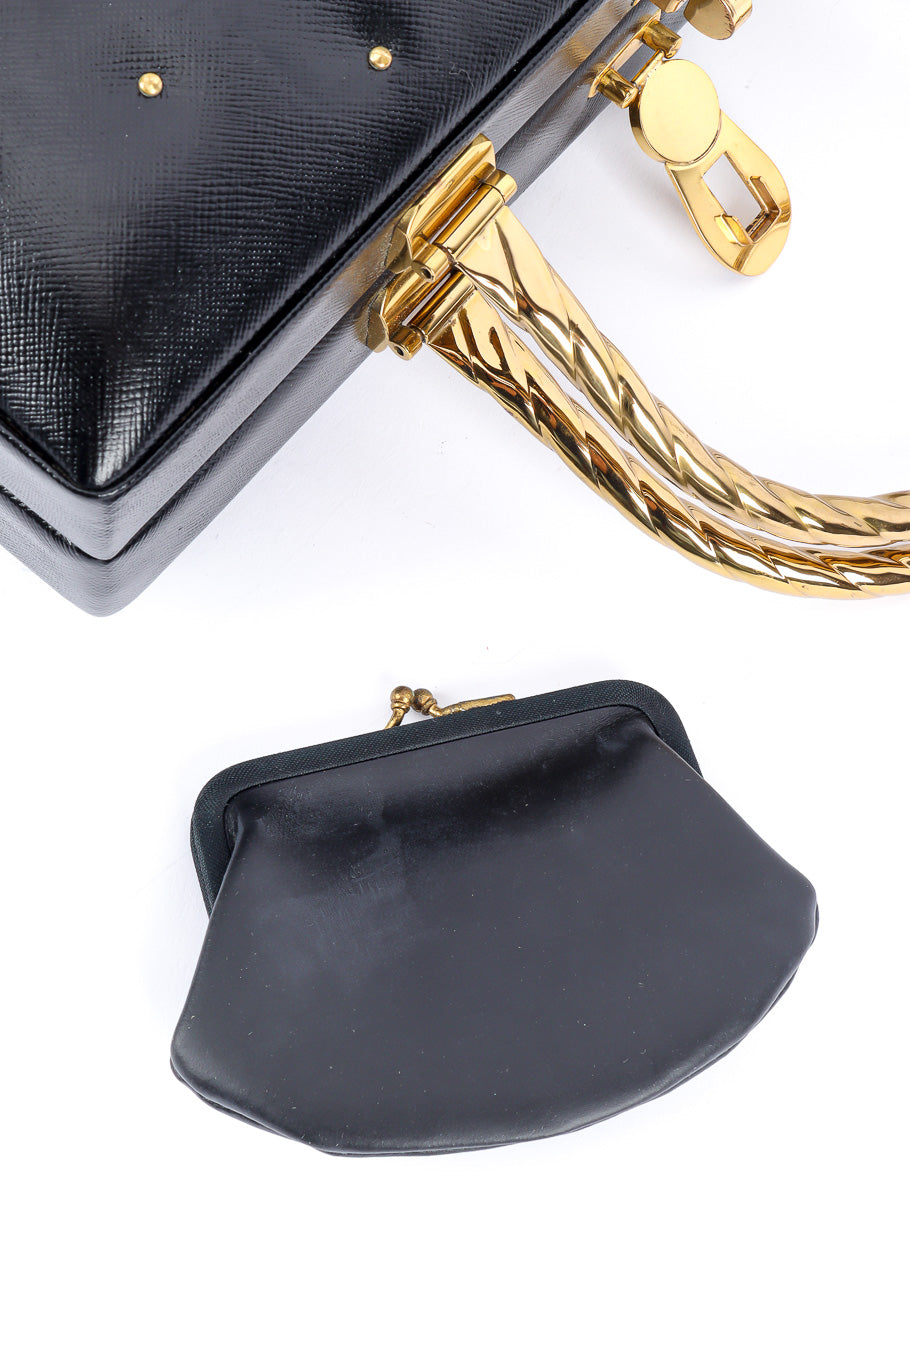 Murray Kruger studded zipperette box bag with coin purse product shot @recessla